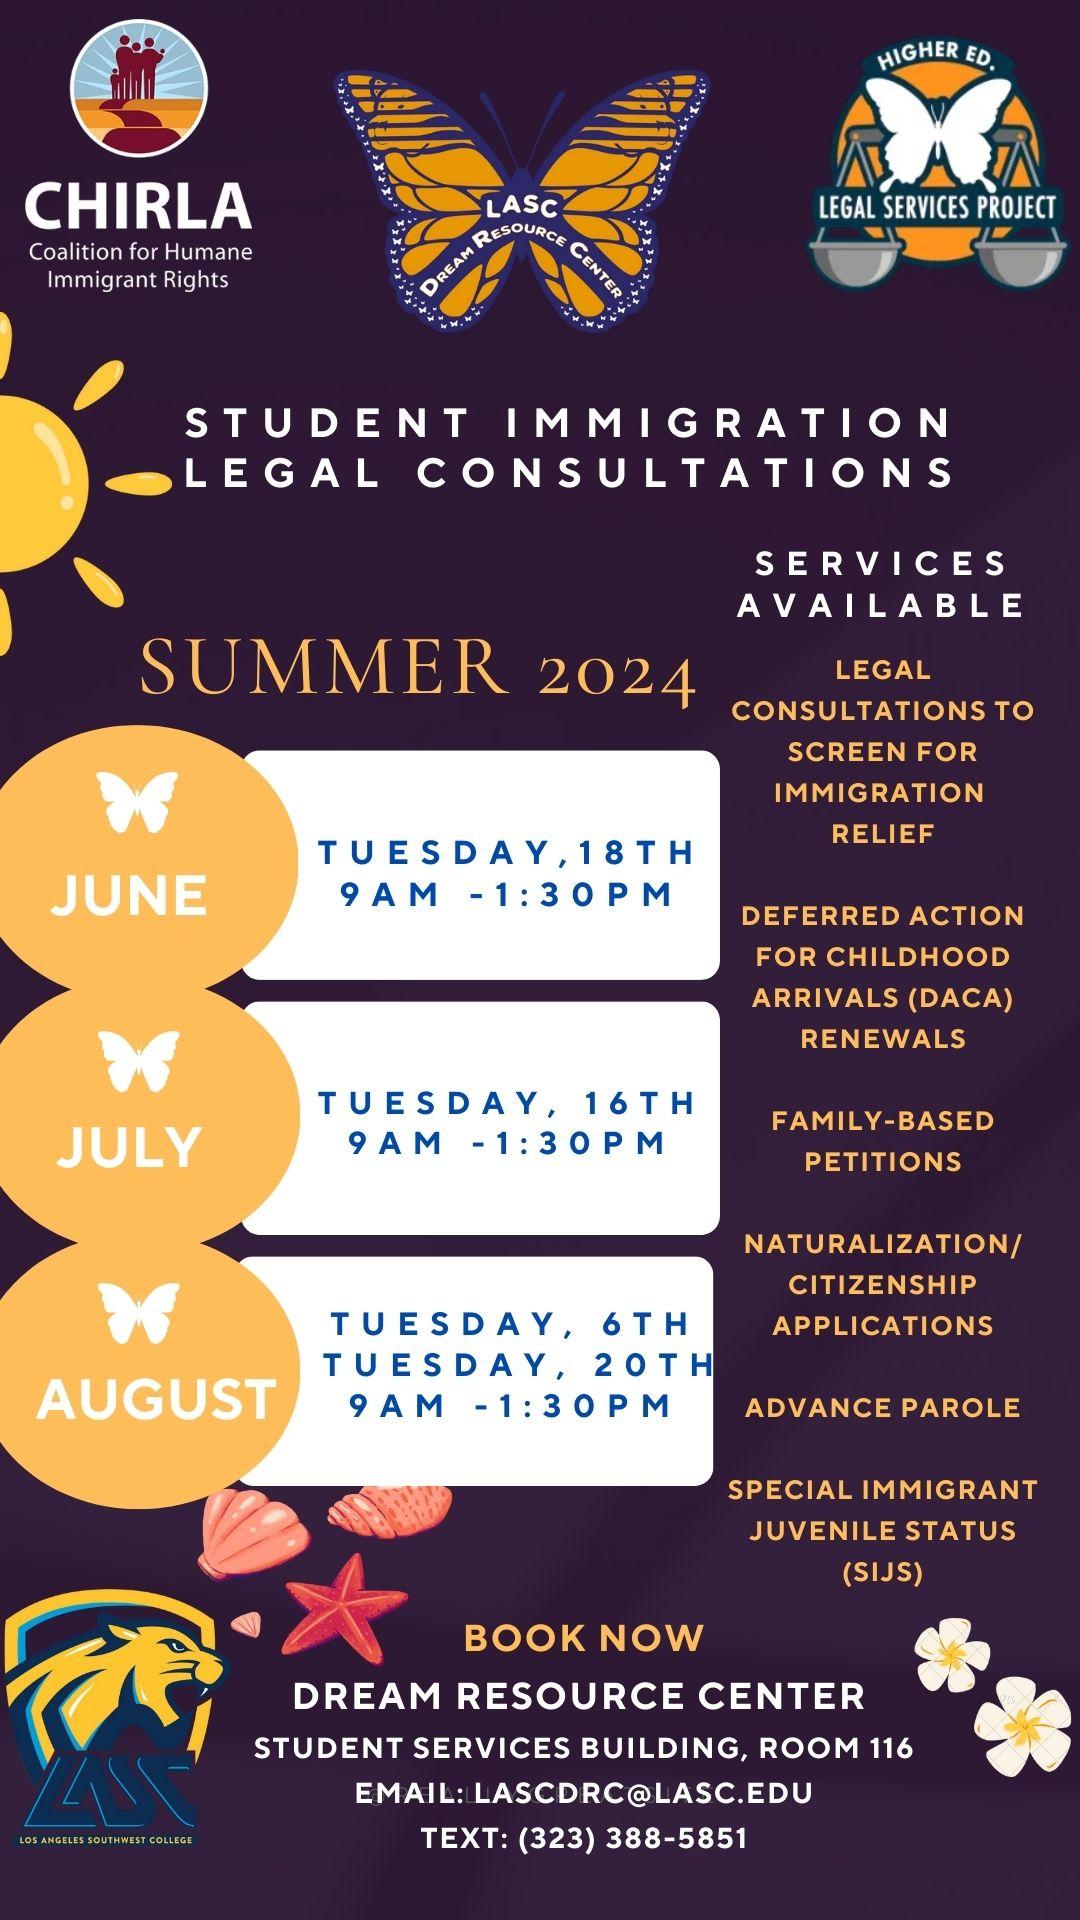 Dream Resource Center flyer showcasing upcoming immigration legal consultation events